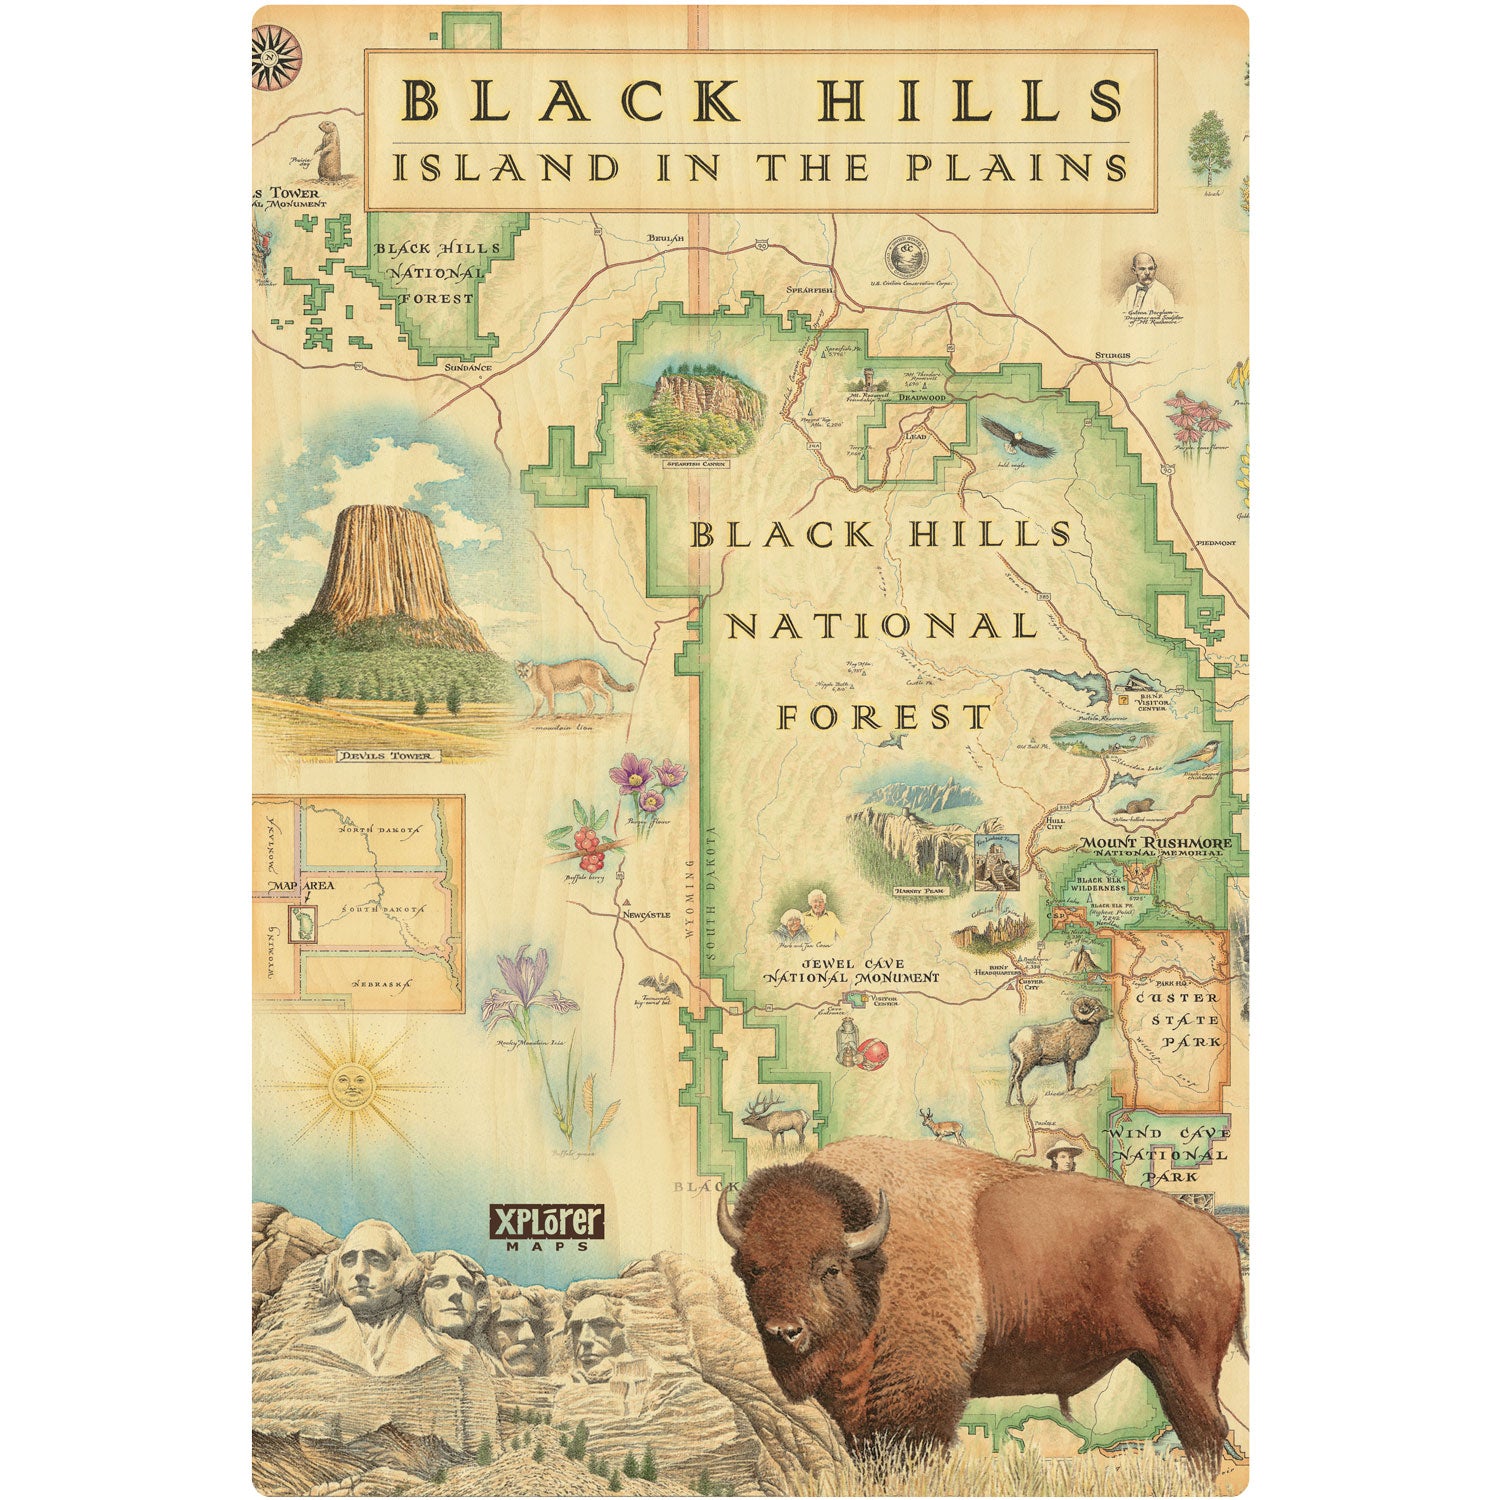 Black Hills National Forest wooden map in earth tone colors. Featuring Mount Rushmore, bison, elk, and flowers.